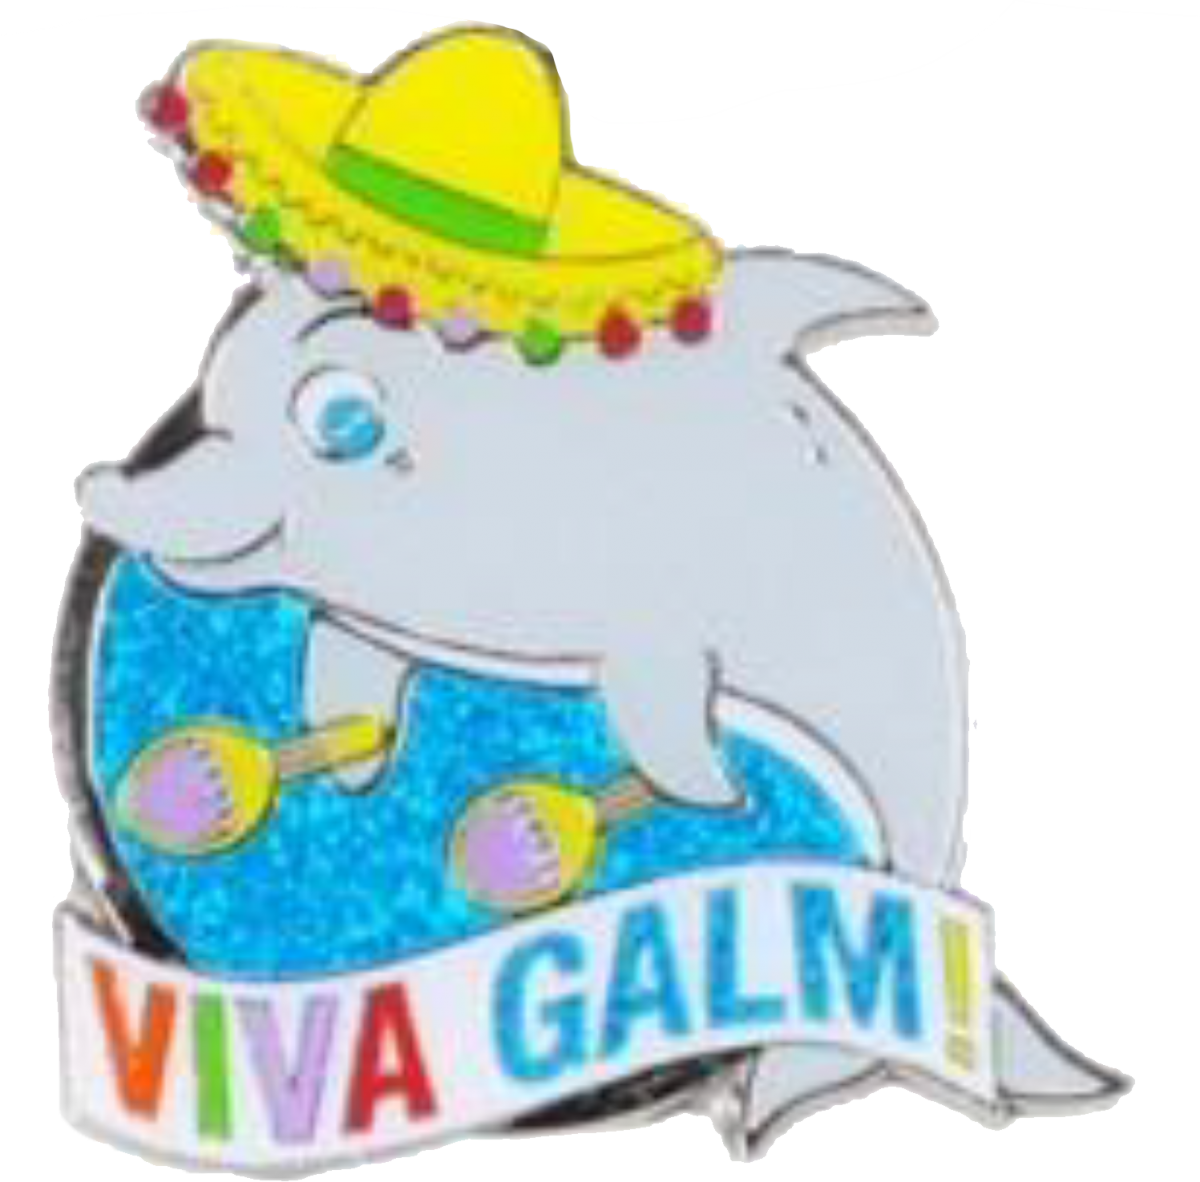 Galm Es Fiesta Medal With Dolphin Mascot In Sombrero - Medal (1200x1182)